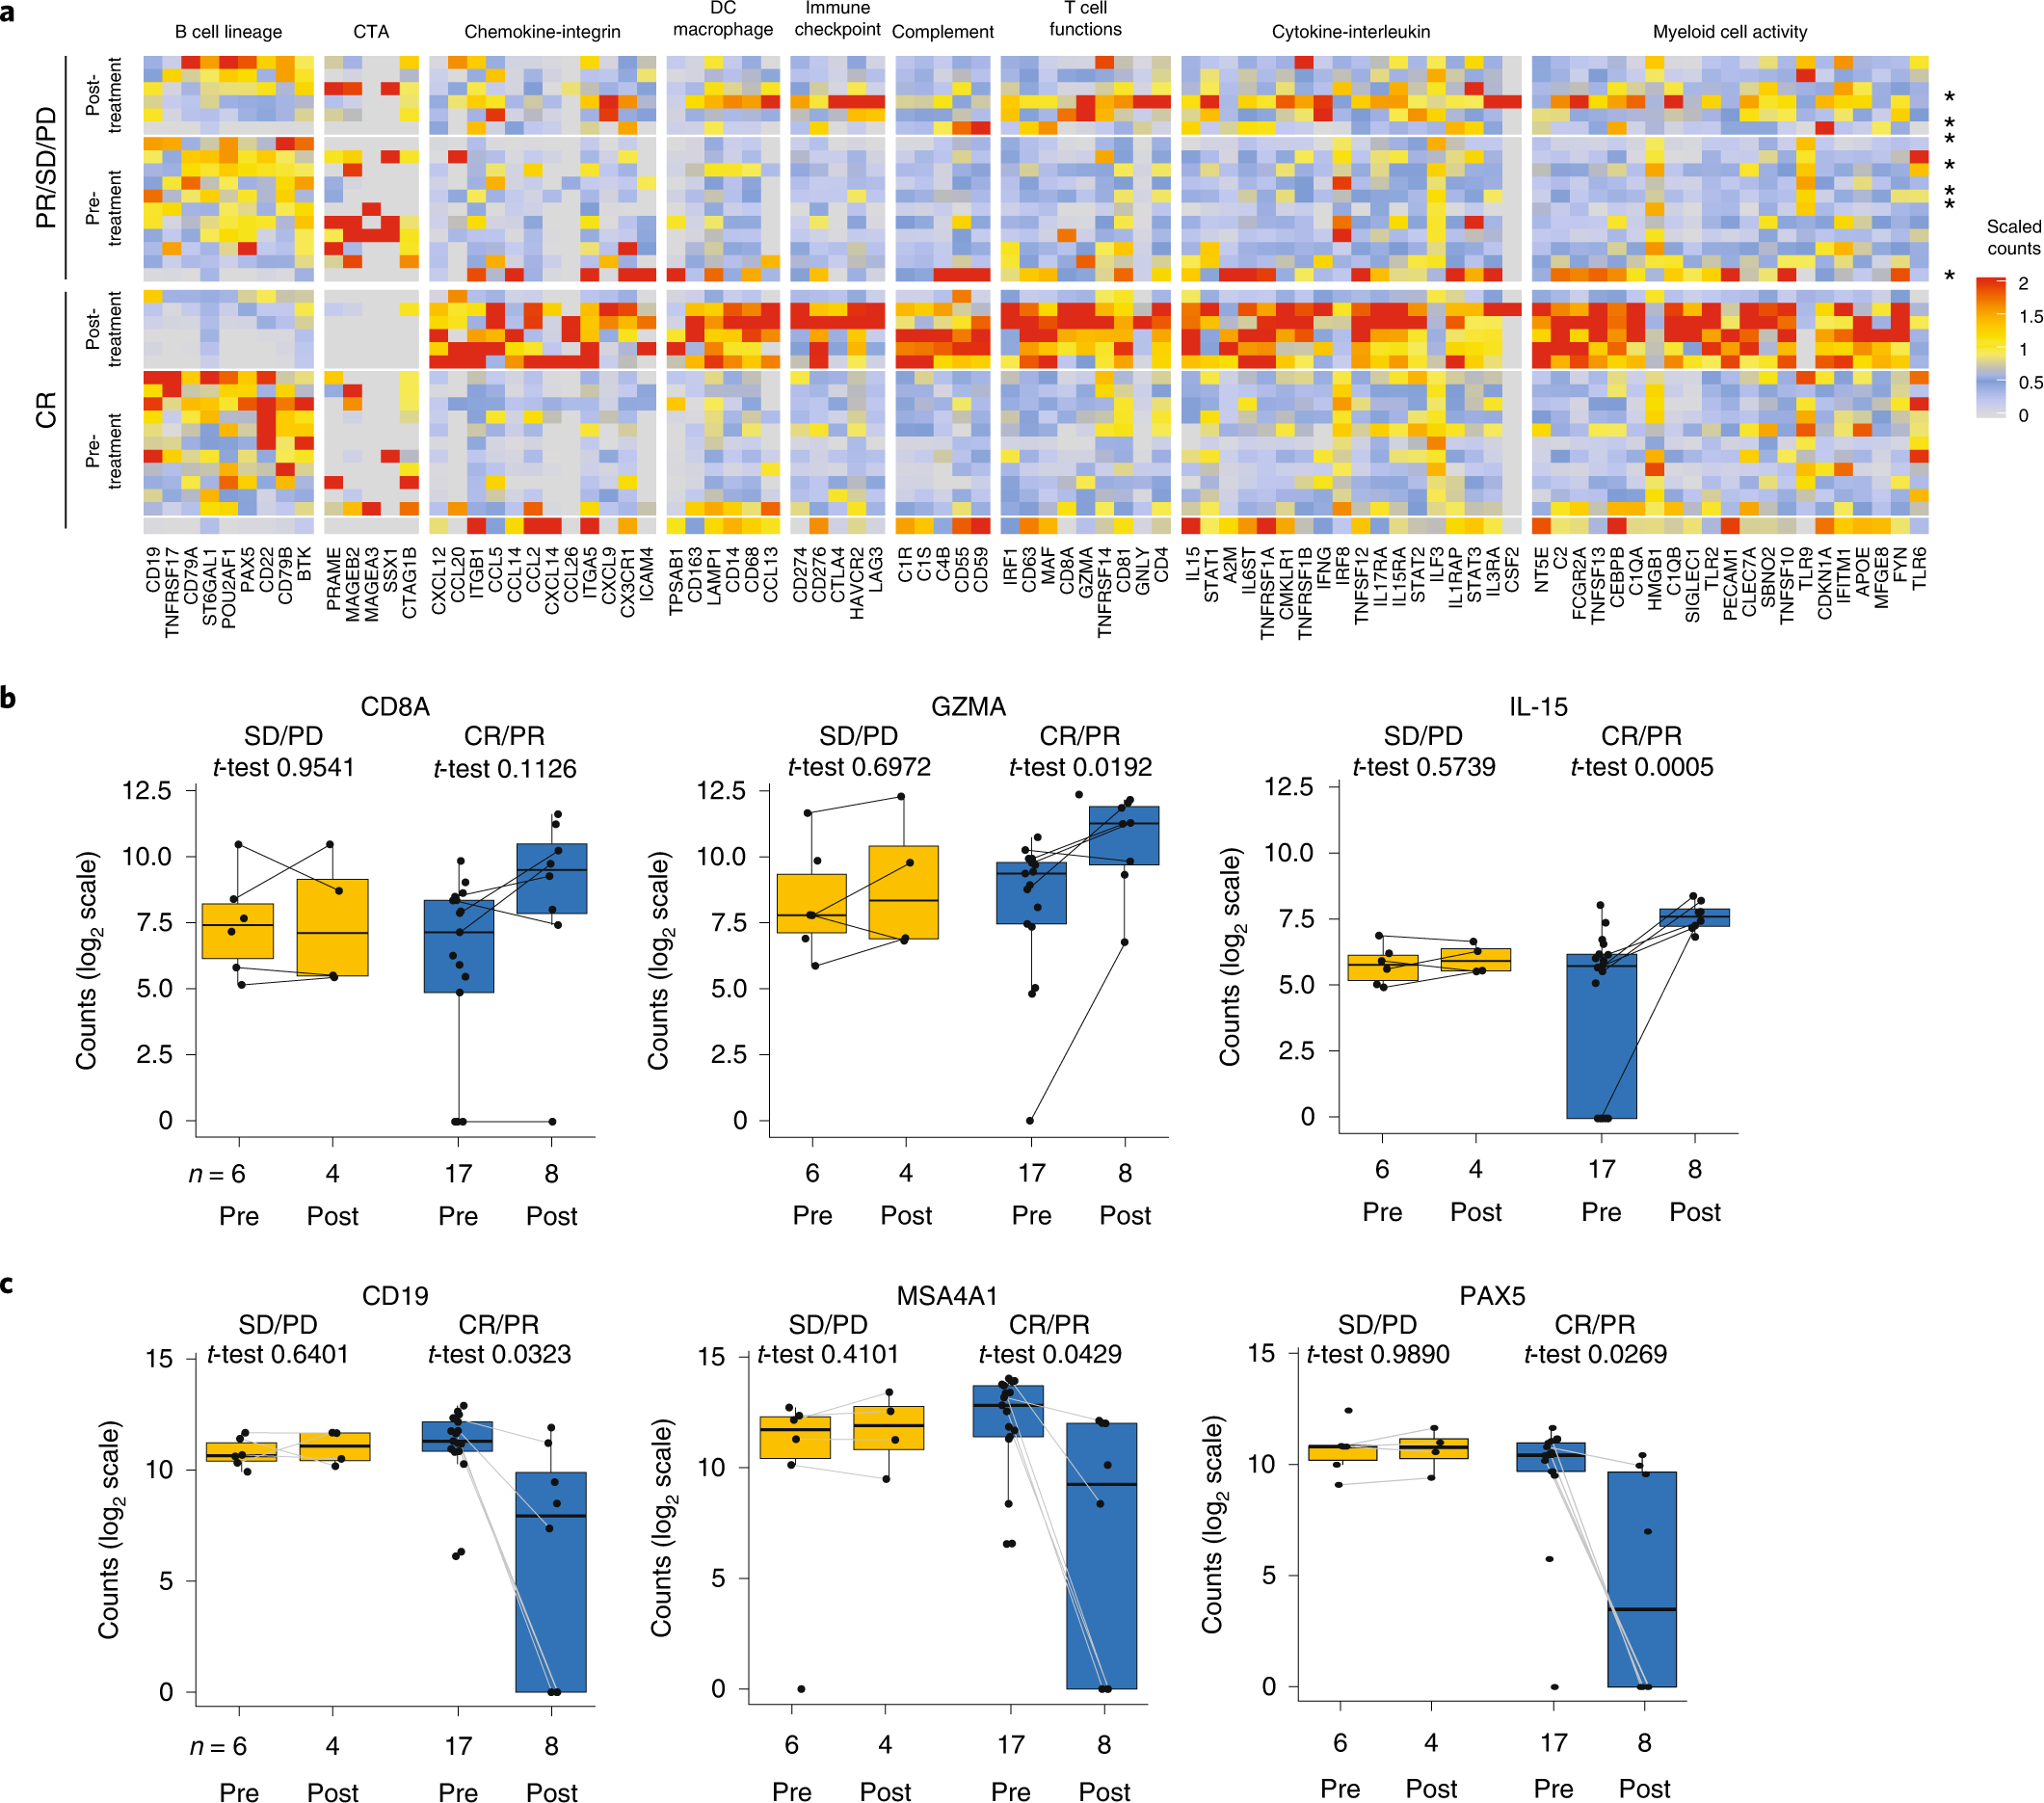 Tumor immune contexture is a determinant of anti-CD19 CAR T cell efficacy  in large B cell lymphoma | Nature Medicine